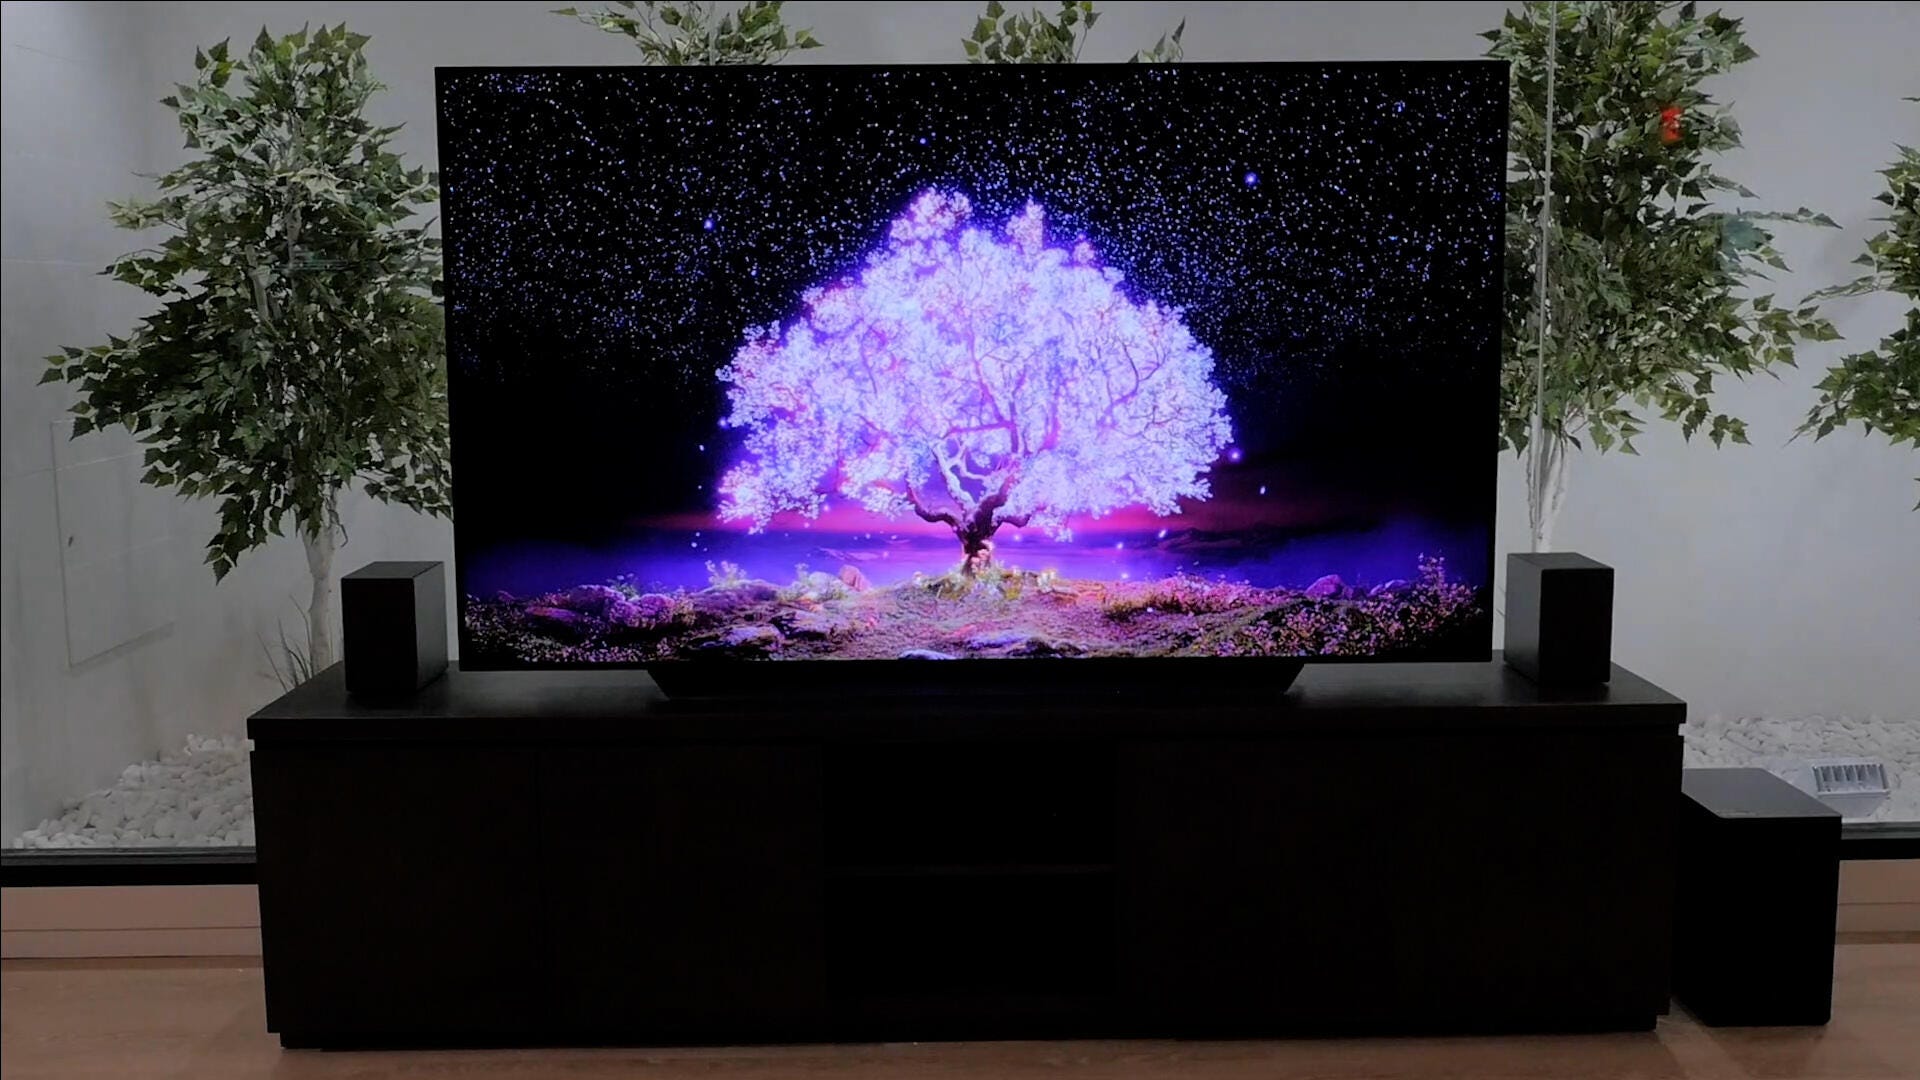 LG's 4K and 8K QNED MiniLED TVs: Full Reveal (CES 2021) 